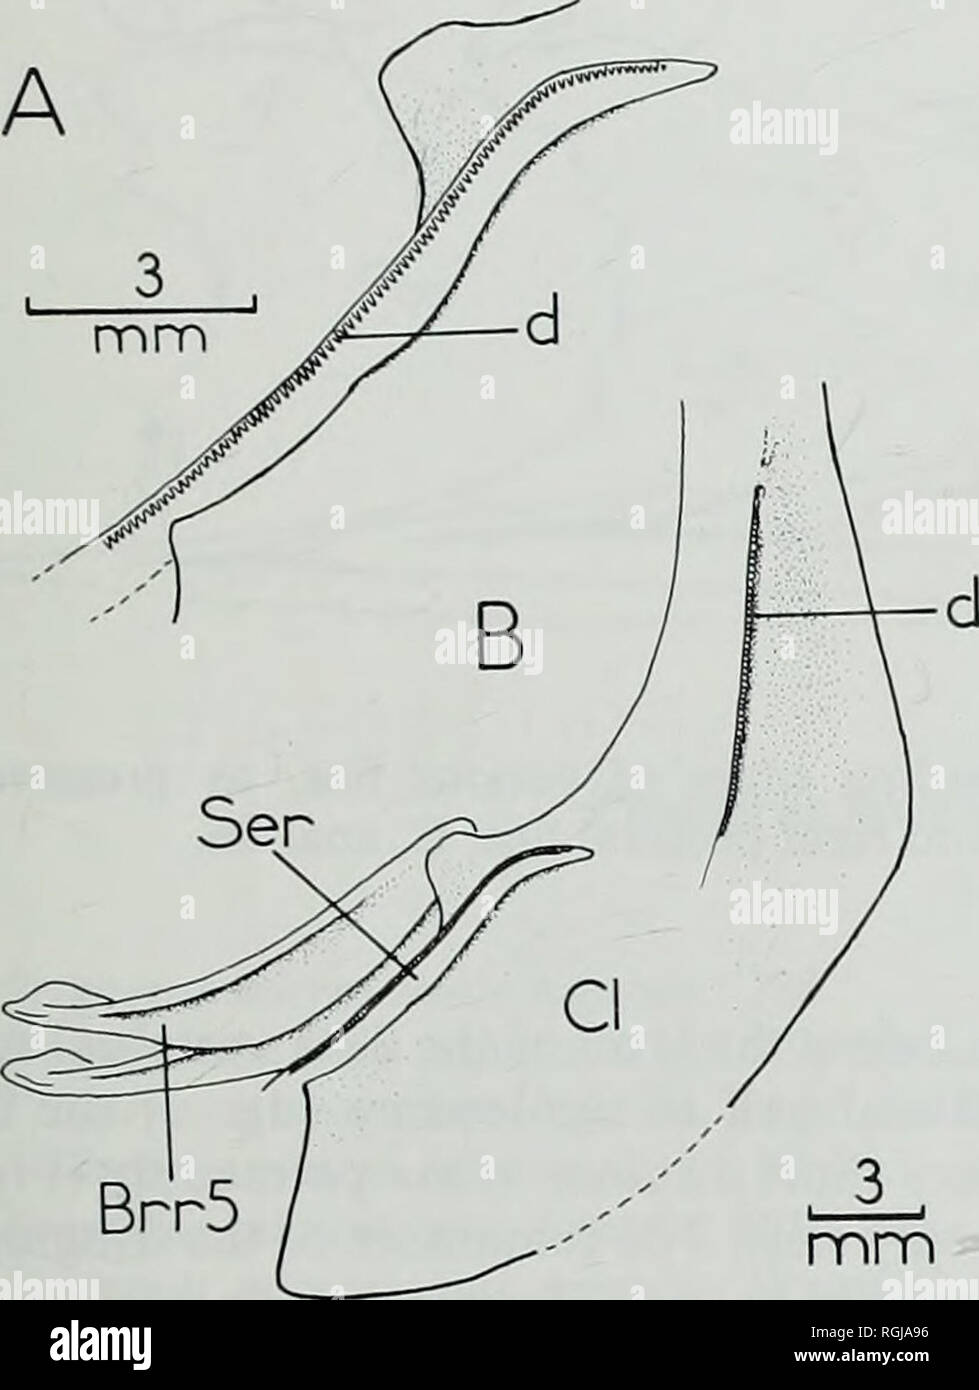 . Bulletin of the British Museum (Natural History), Geology. ventral surface of the cleithrum, as in Lepisosteus (Jessen 1972: text-fig. 4). The glenoid surface for the articulation of the proximal radials of the fin occurs on the outer part of the arch. The endoskeleton of the fin is not clearly preserved; there appear to be five proximal radials increasing in length posteriorly. There are about 15 pectoral fin-rays. The leading ray, devoid of basal and fringing fulcra, consists of two fused hemitrichia terminating below the segmented part of the succeeding ray (Fig. 28B). The leading ray is  Stock Photo